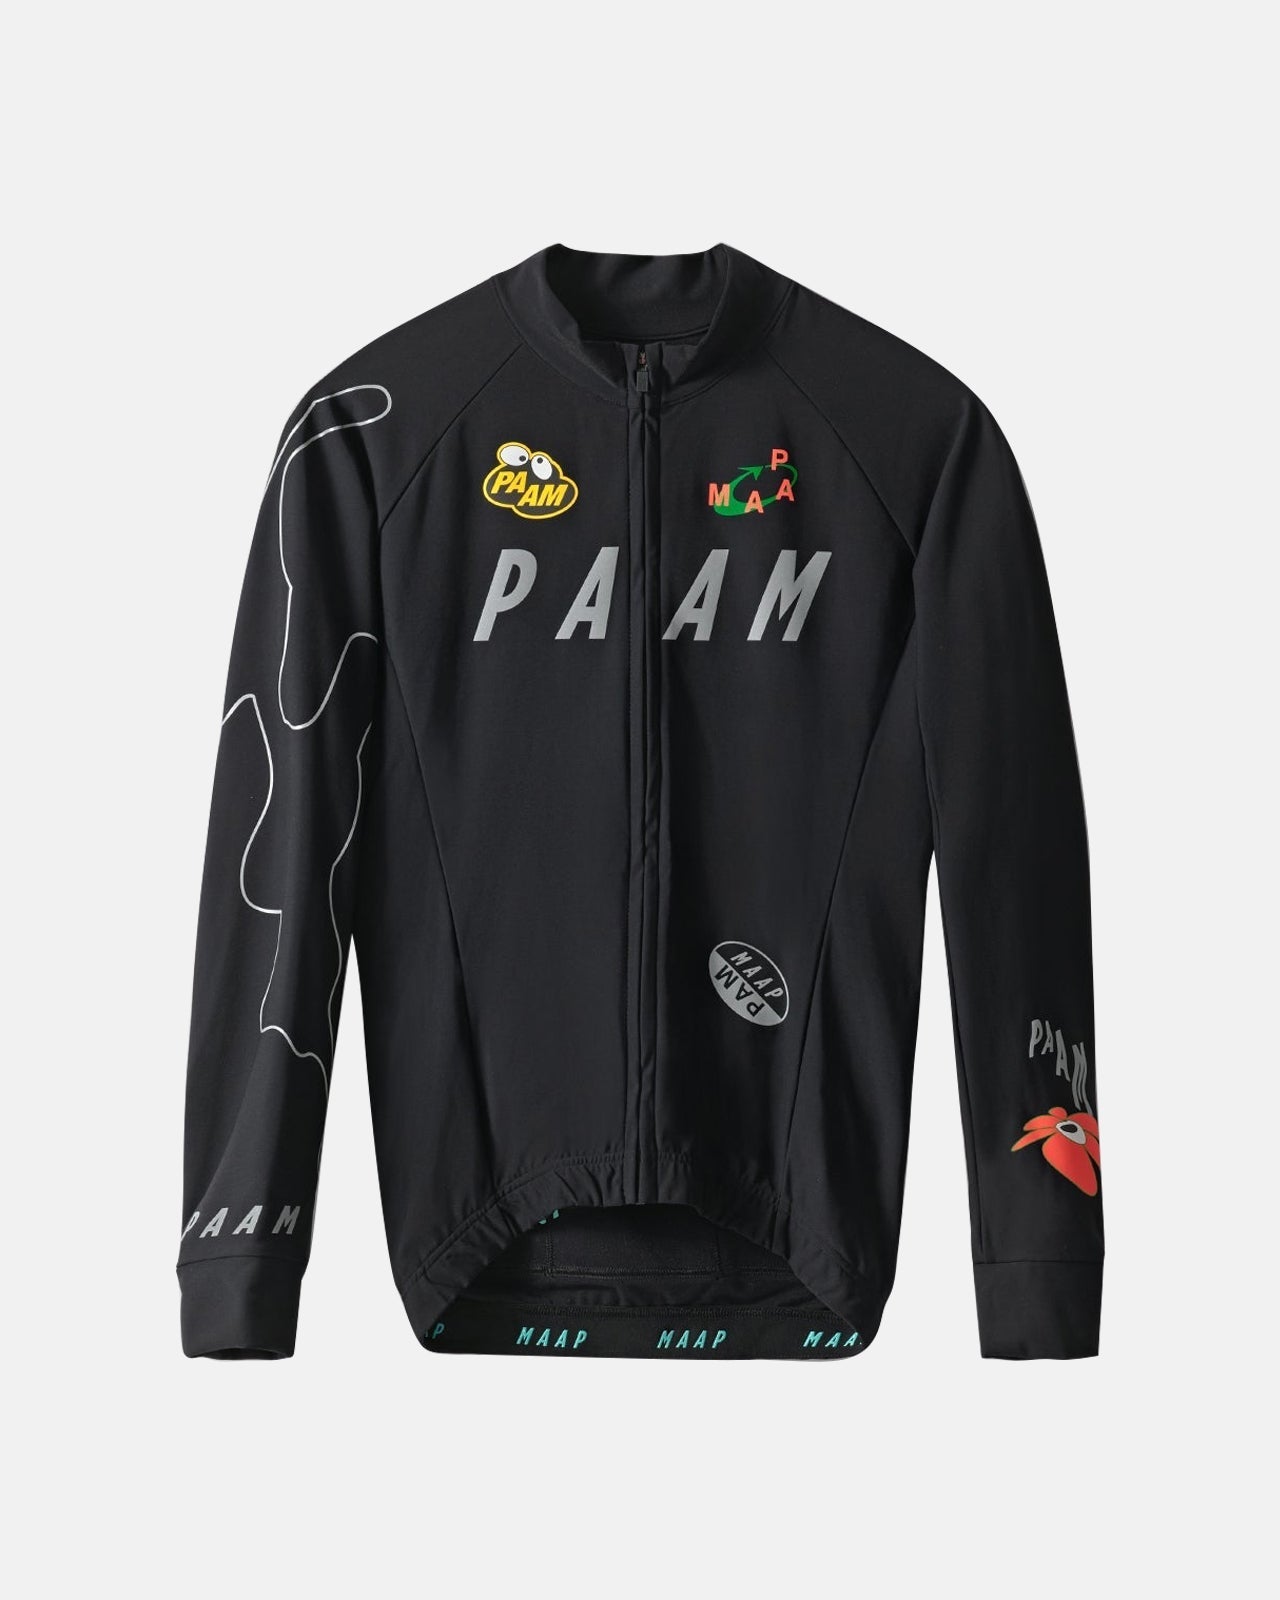 x PAM Thermal LS Jersey - Black | Enroute.cc